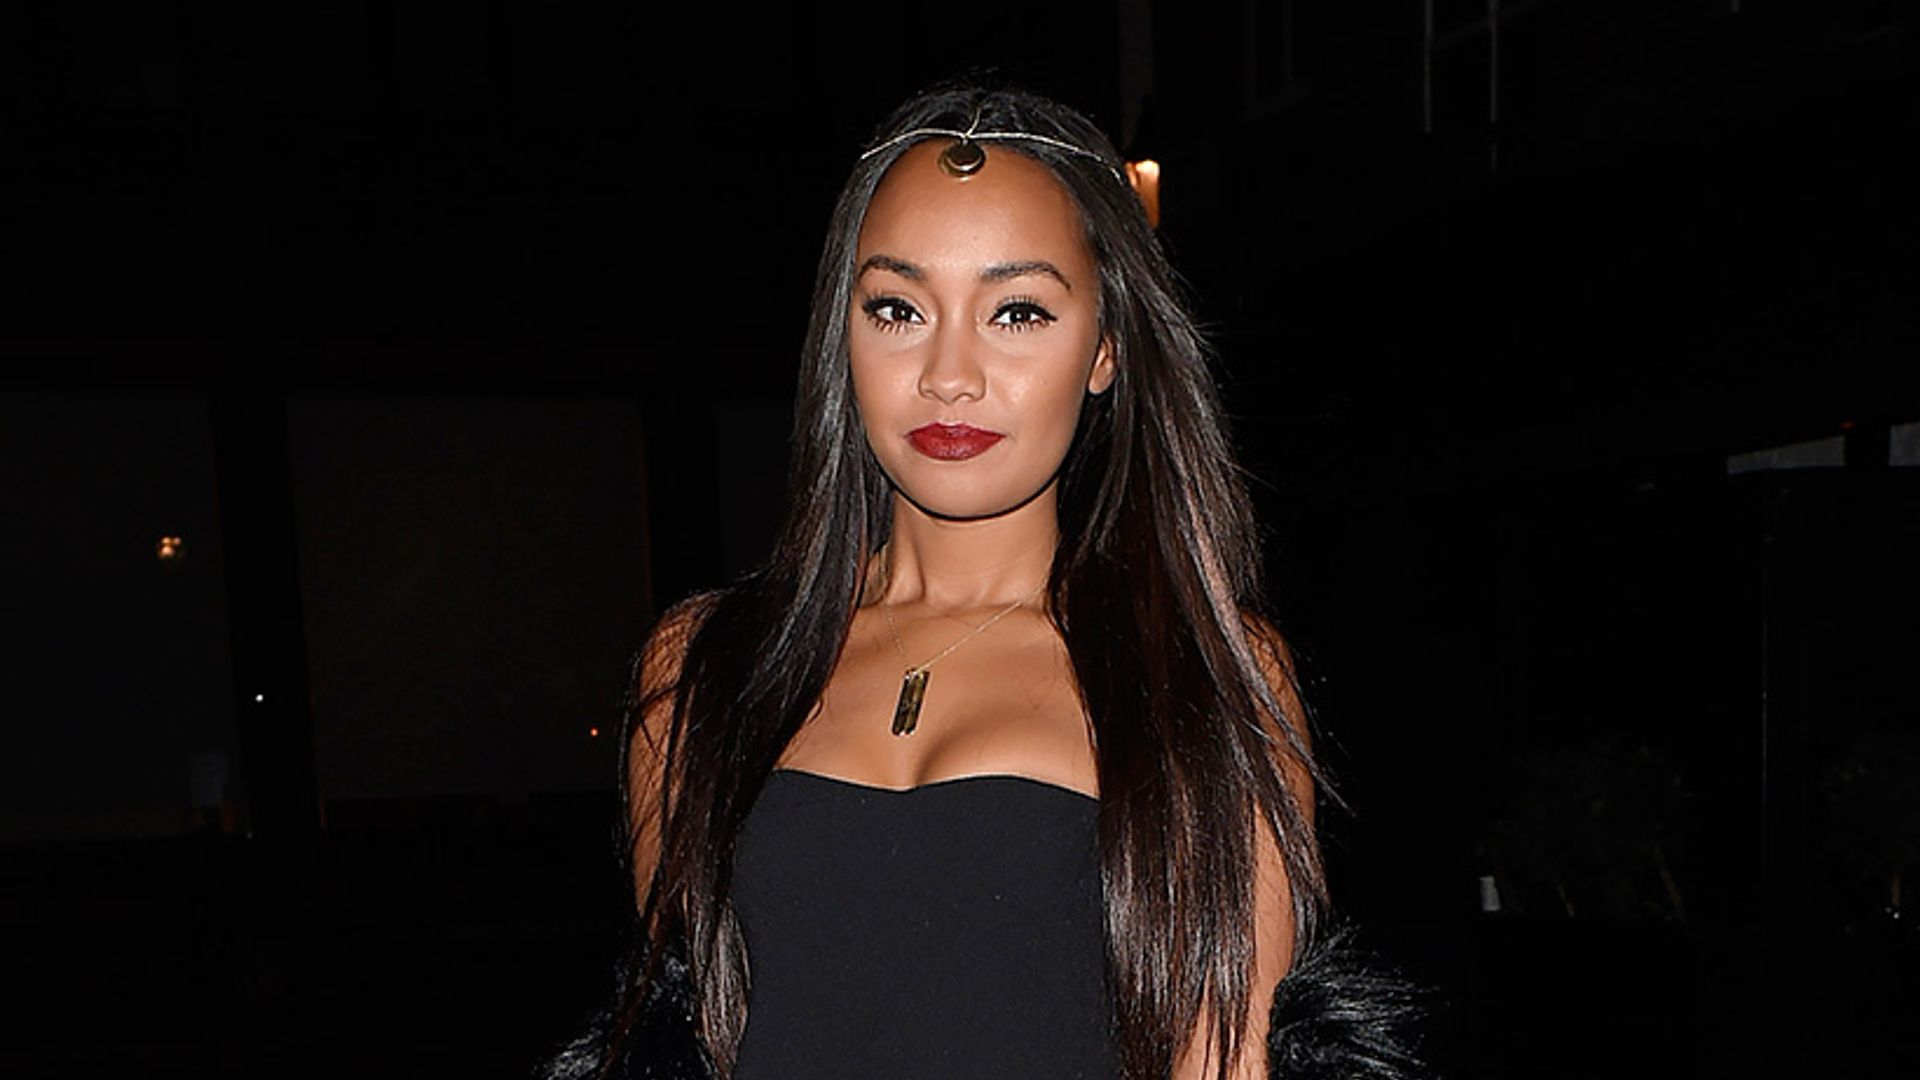 Little Mix's Leigh-Anne Pinnock attacker given three-year restraining order